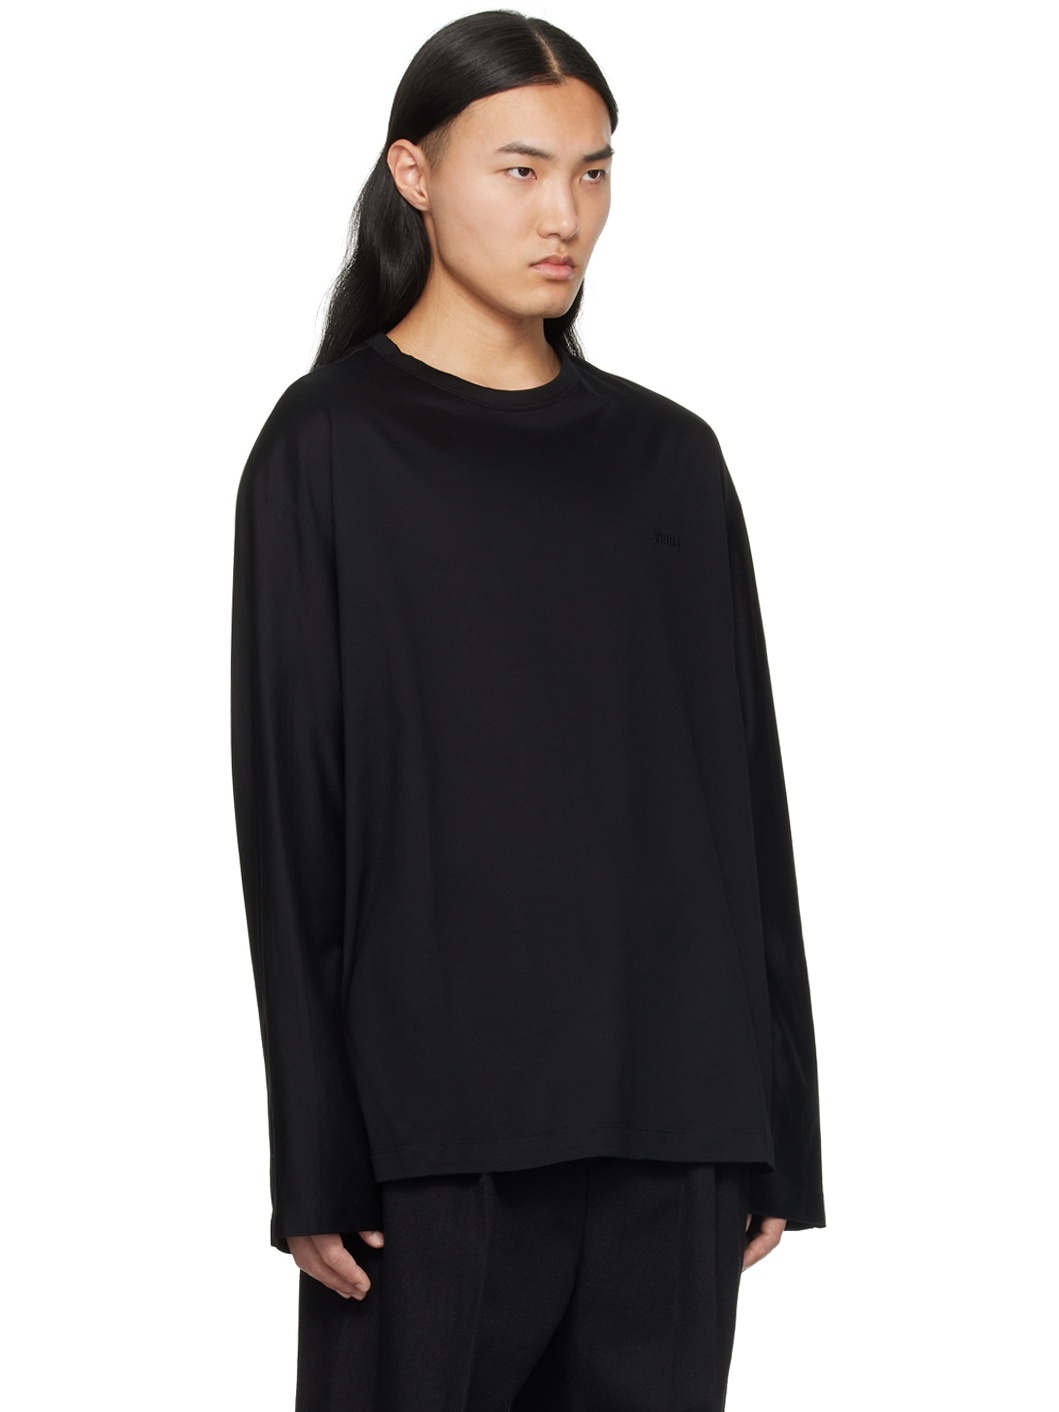 Black Embroidered Long Sleeve T-Shirt - 2